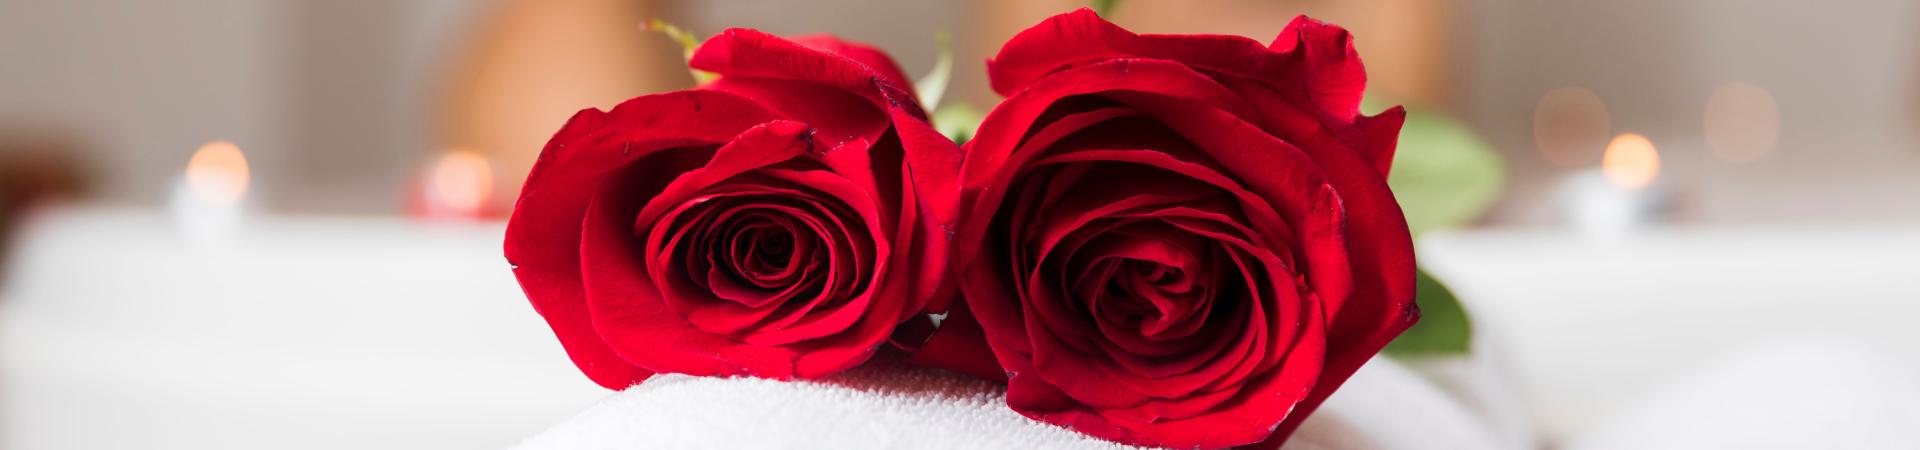 close-up-red-roses-with-defocused-couple